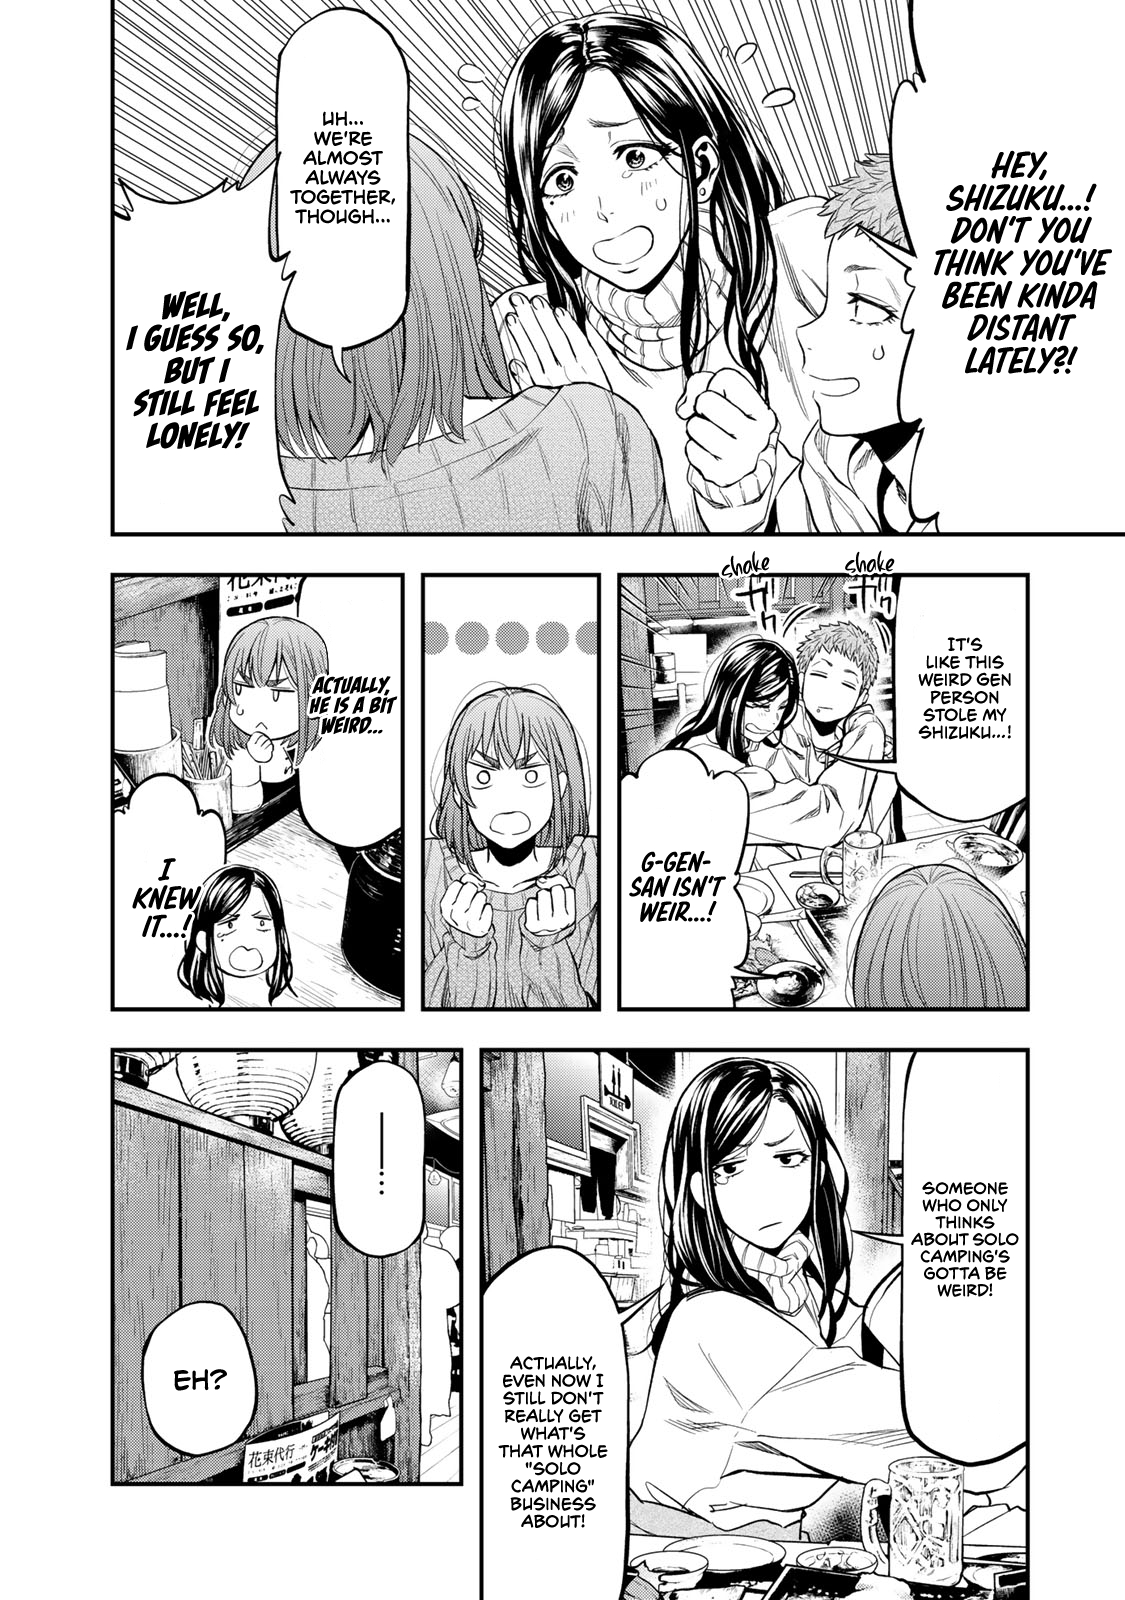 Futari Solo Camp Vol. 2 Ch. 11 What to do, you ask?